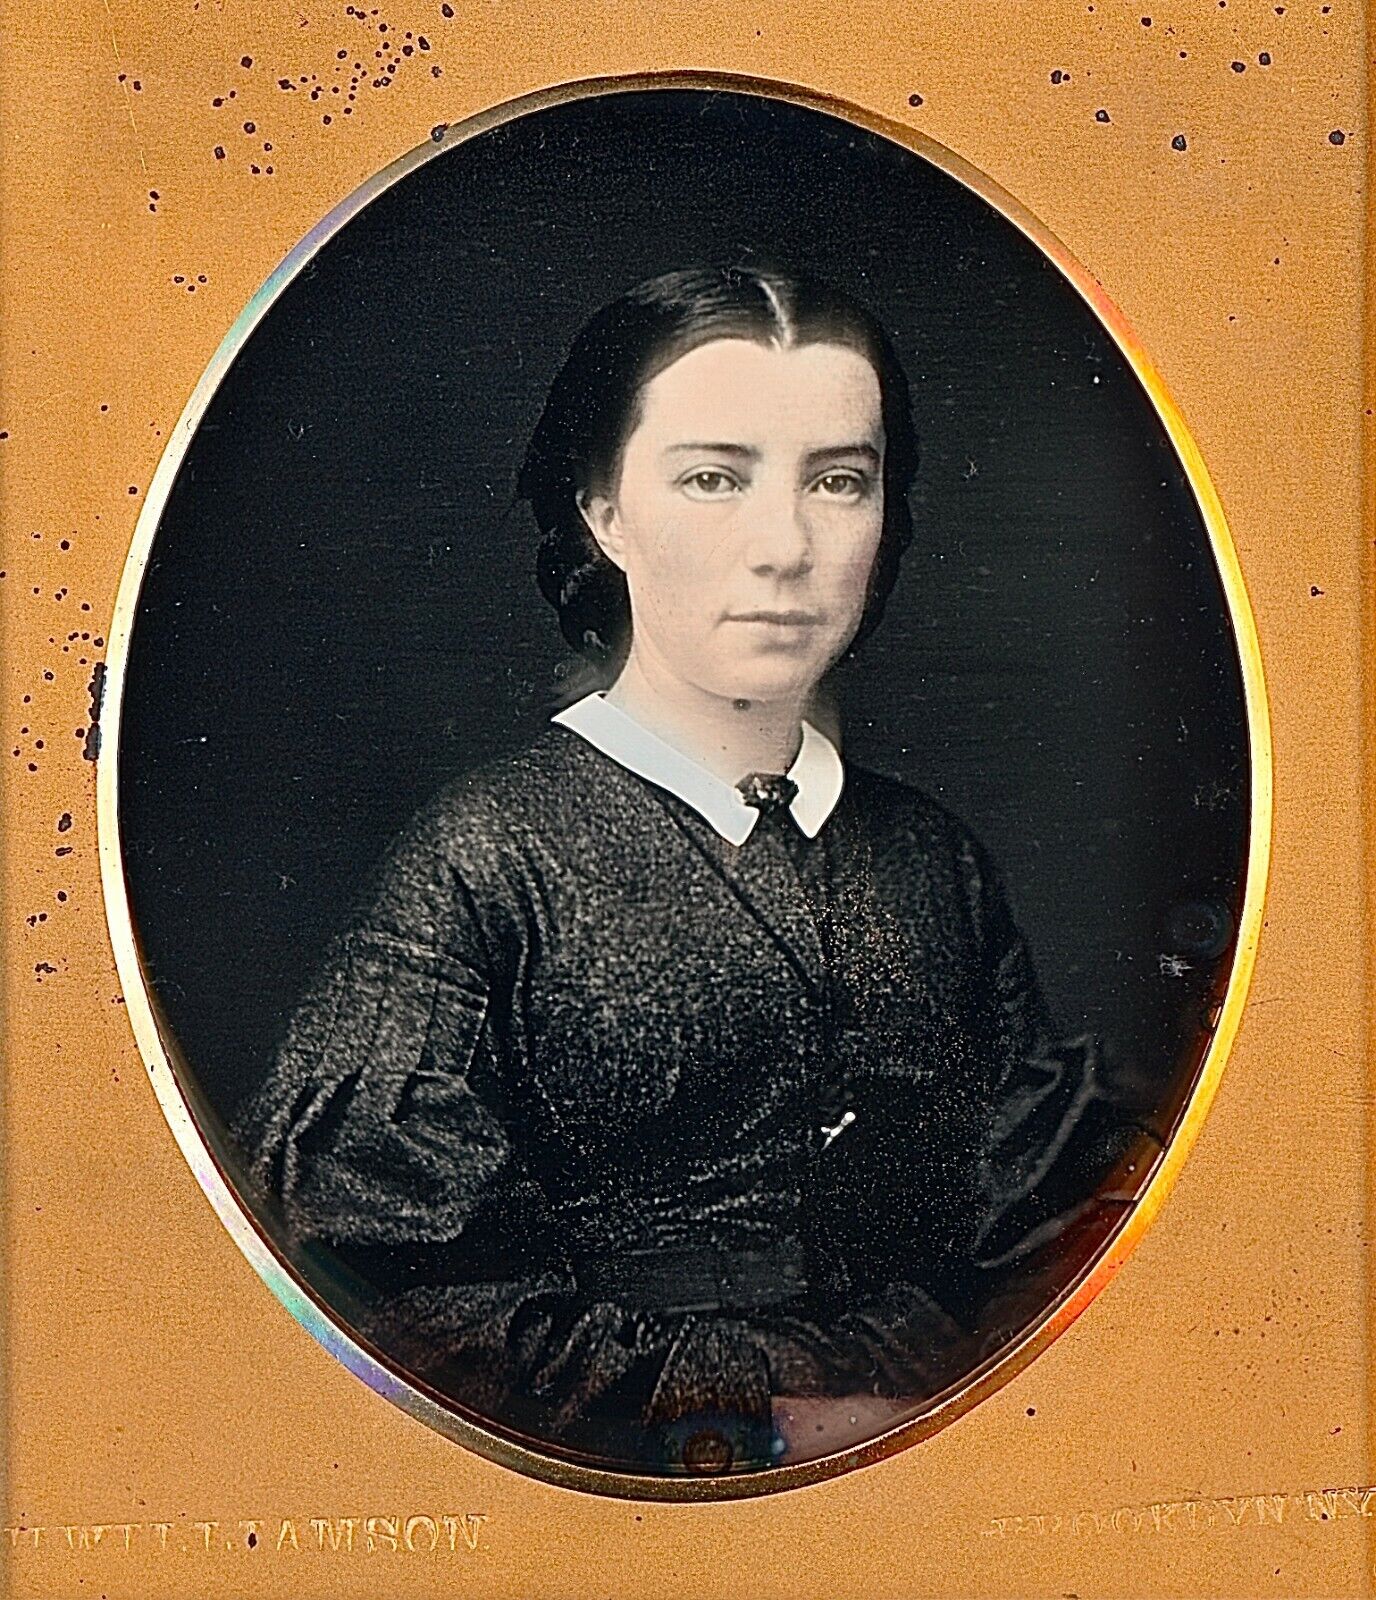 Pretty Young Lady By Williamson Brooklyn, NY Tinted 1/6 Plate Daguerreotype H788